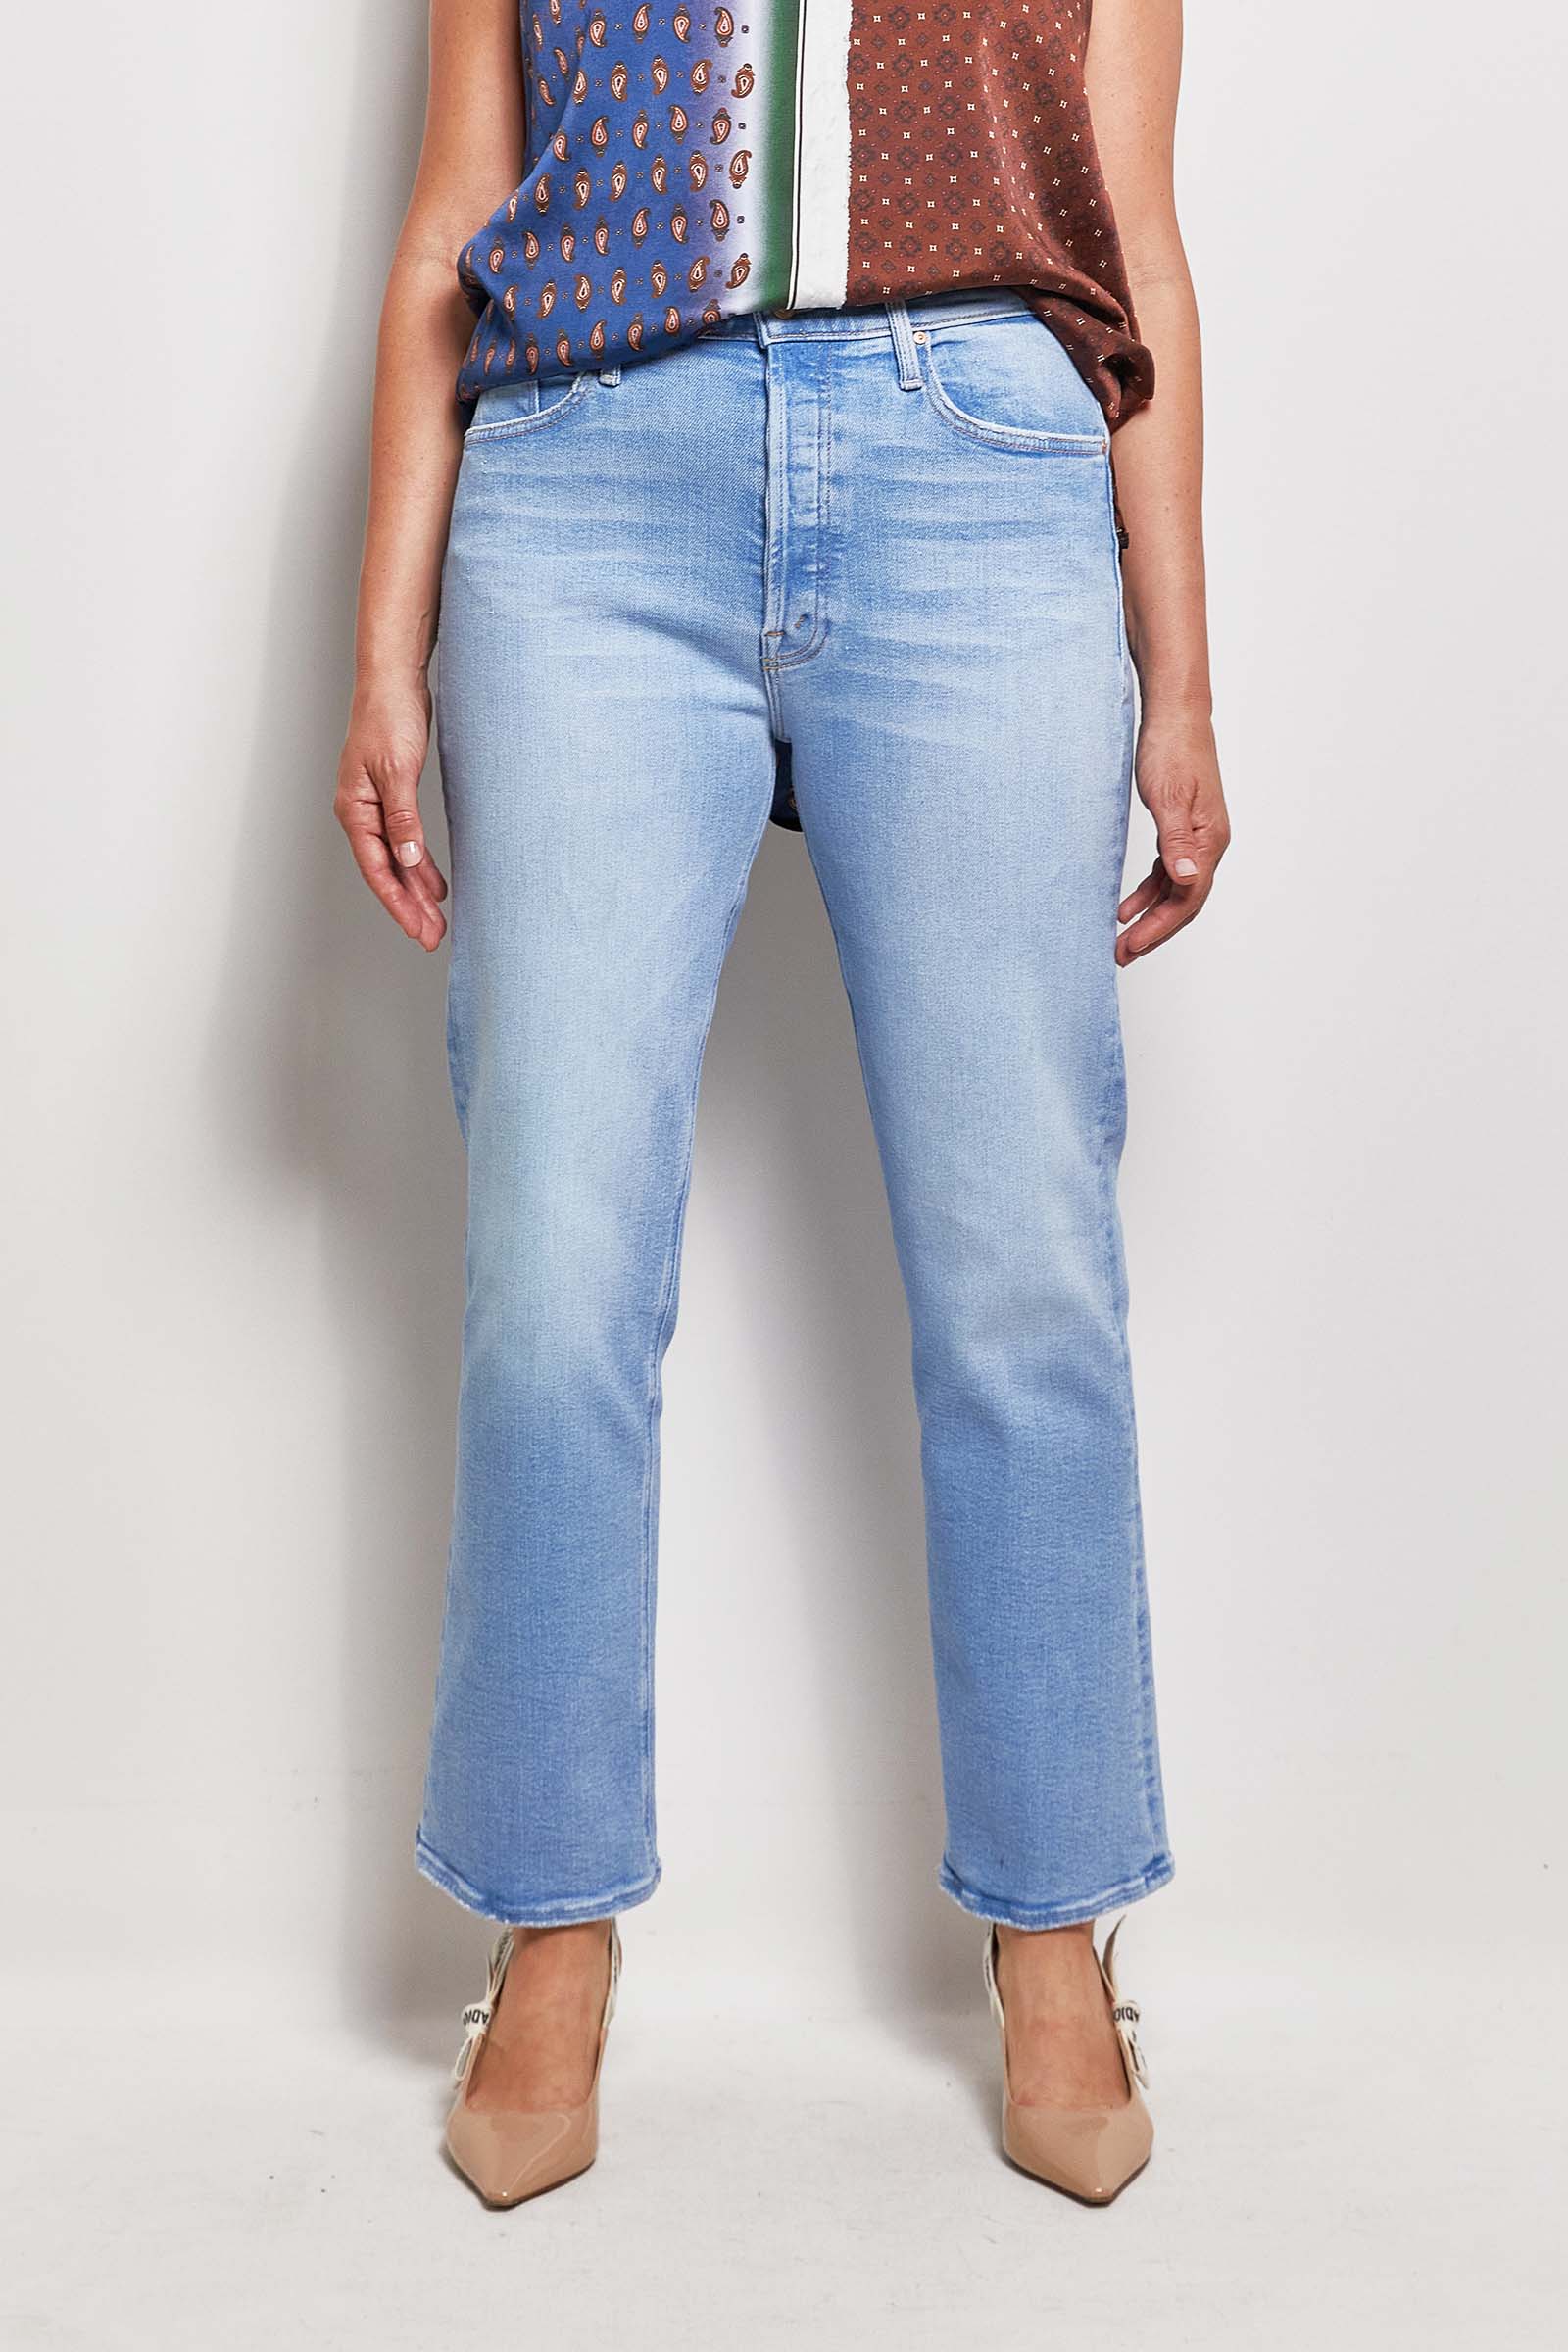 mother denim ankle cat daddy jeans.